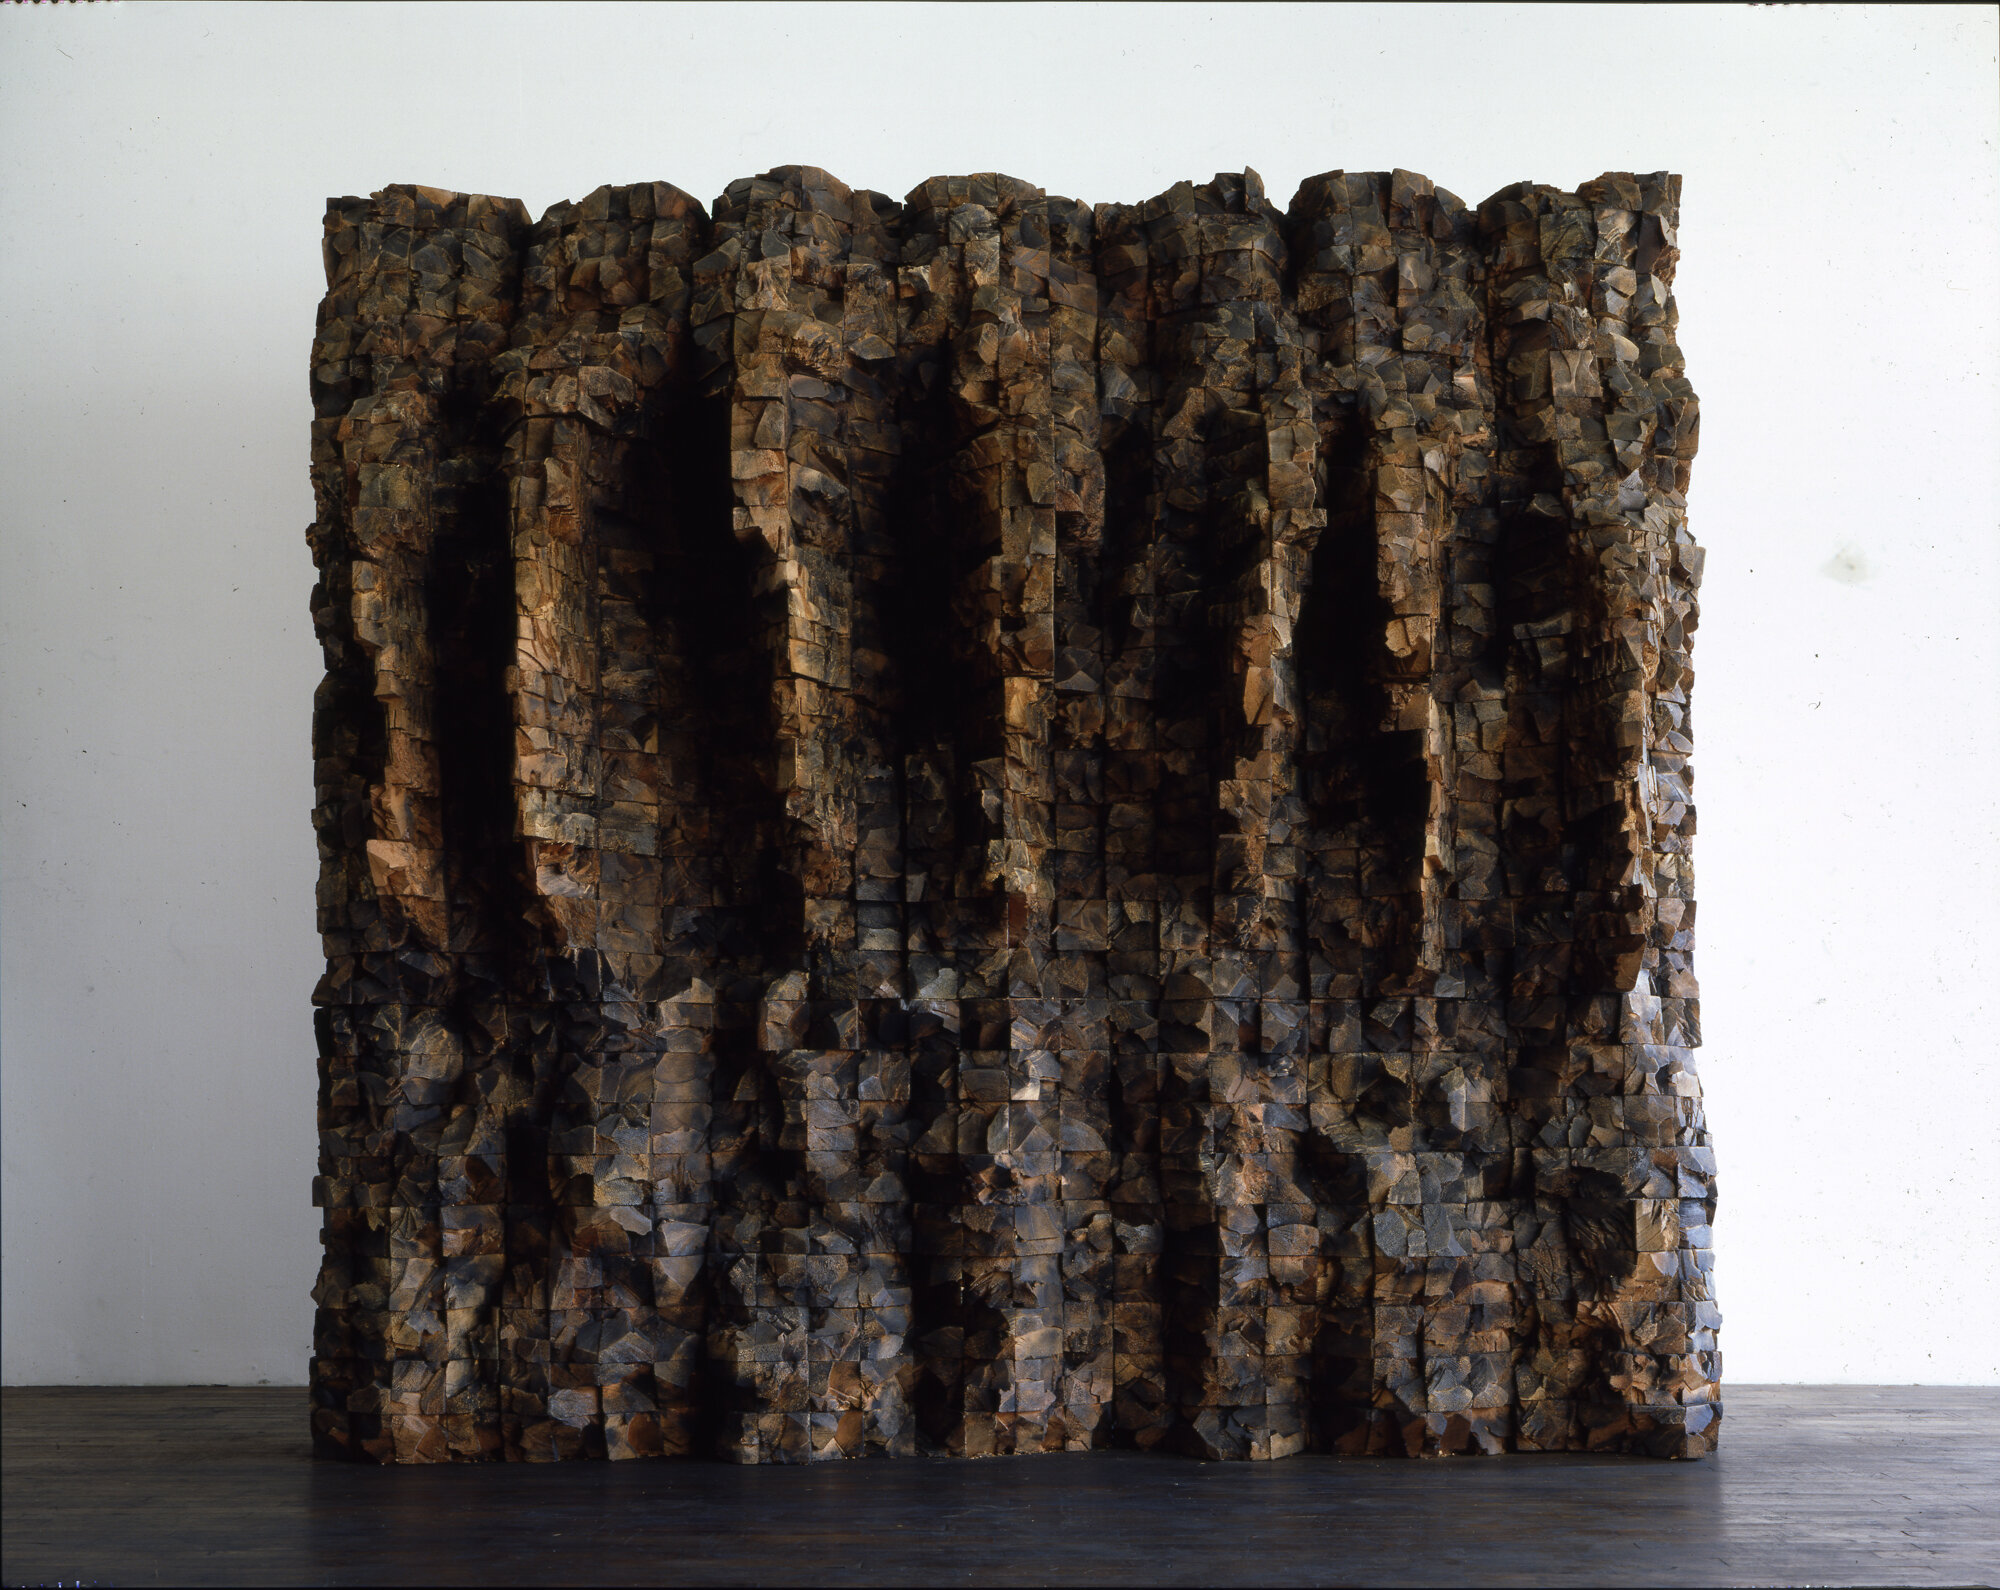       Lace Mountains , 1989 Cedar and graphite 96 x 96 x 36 in.    Lorence Monk Gallery  